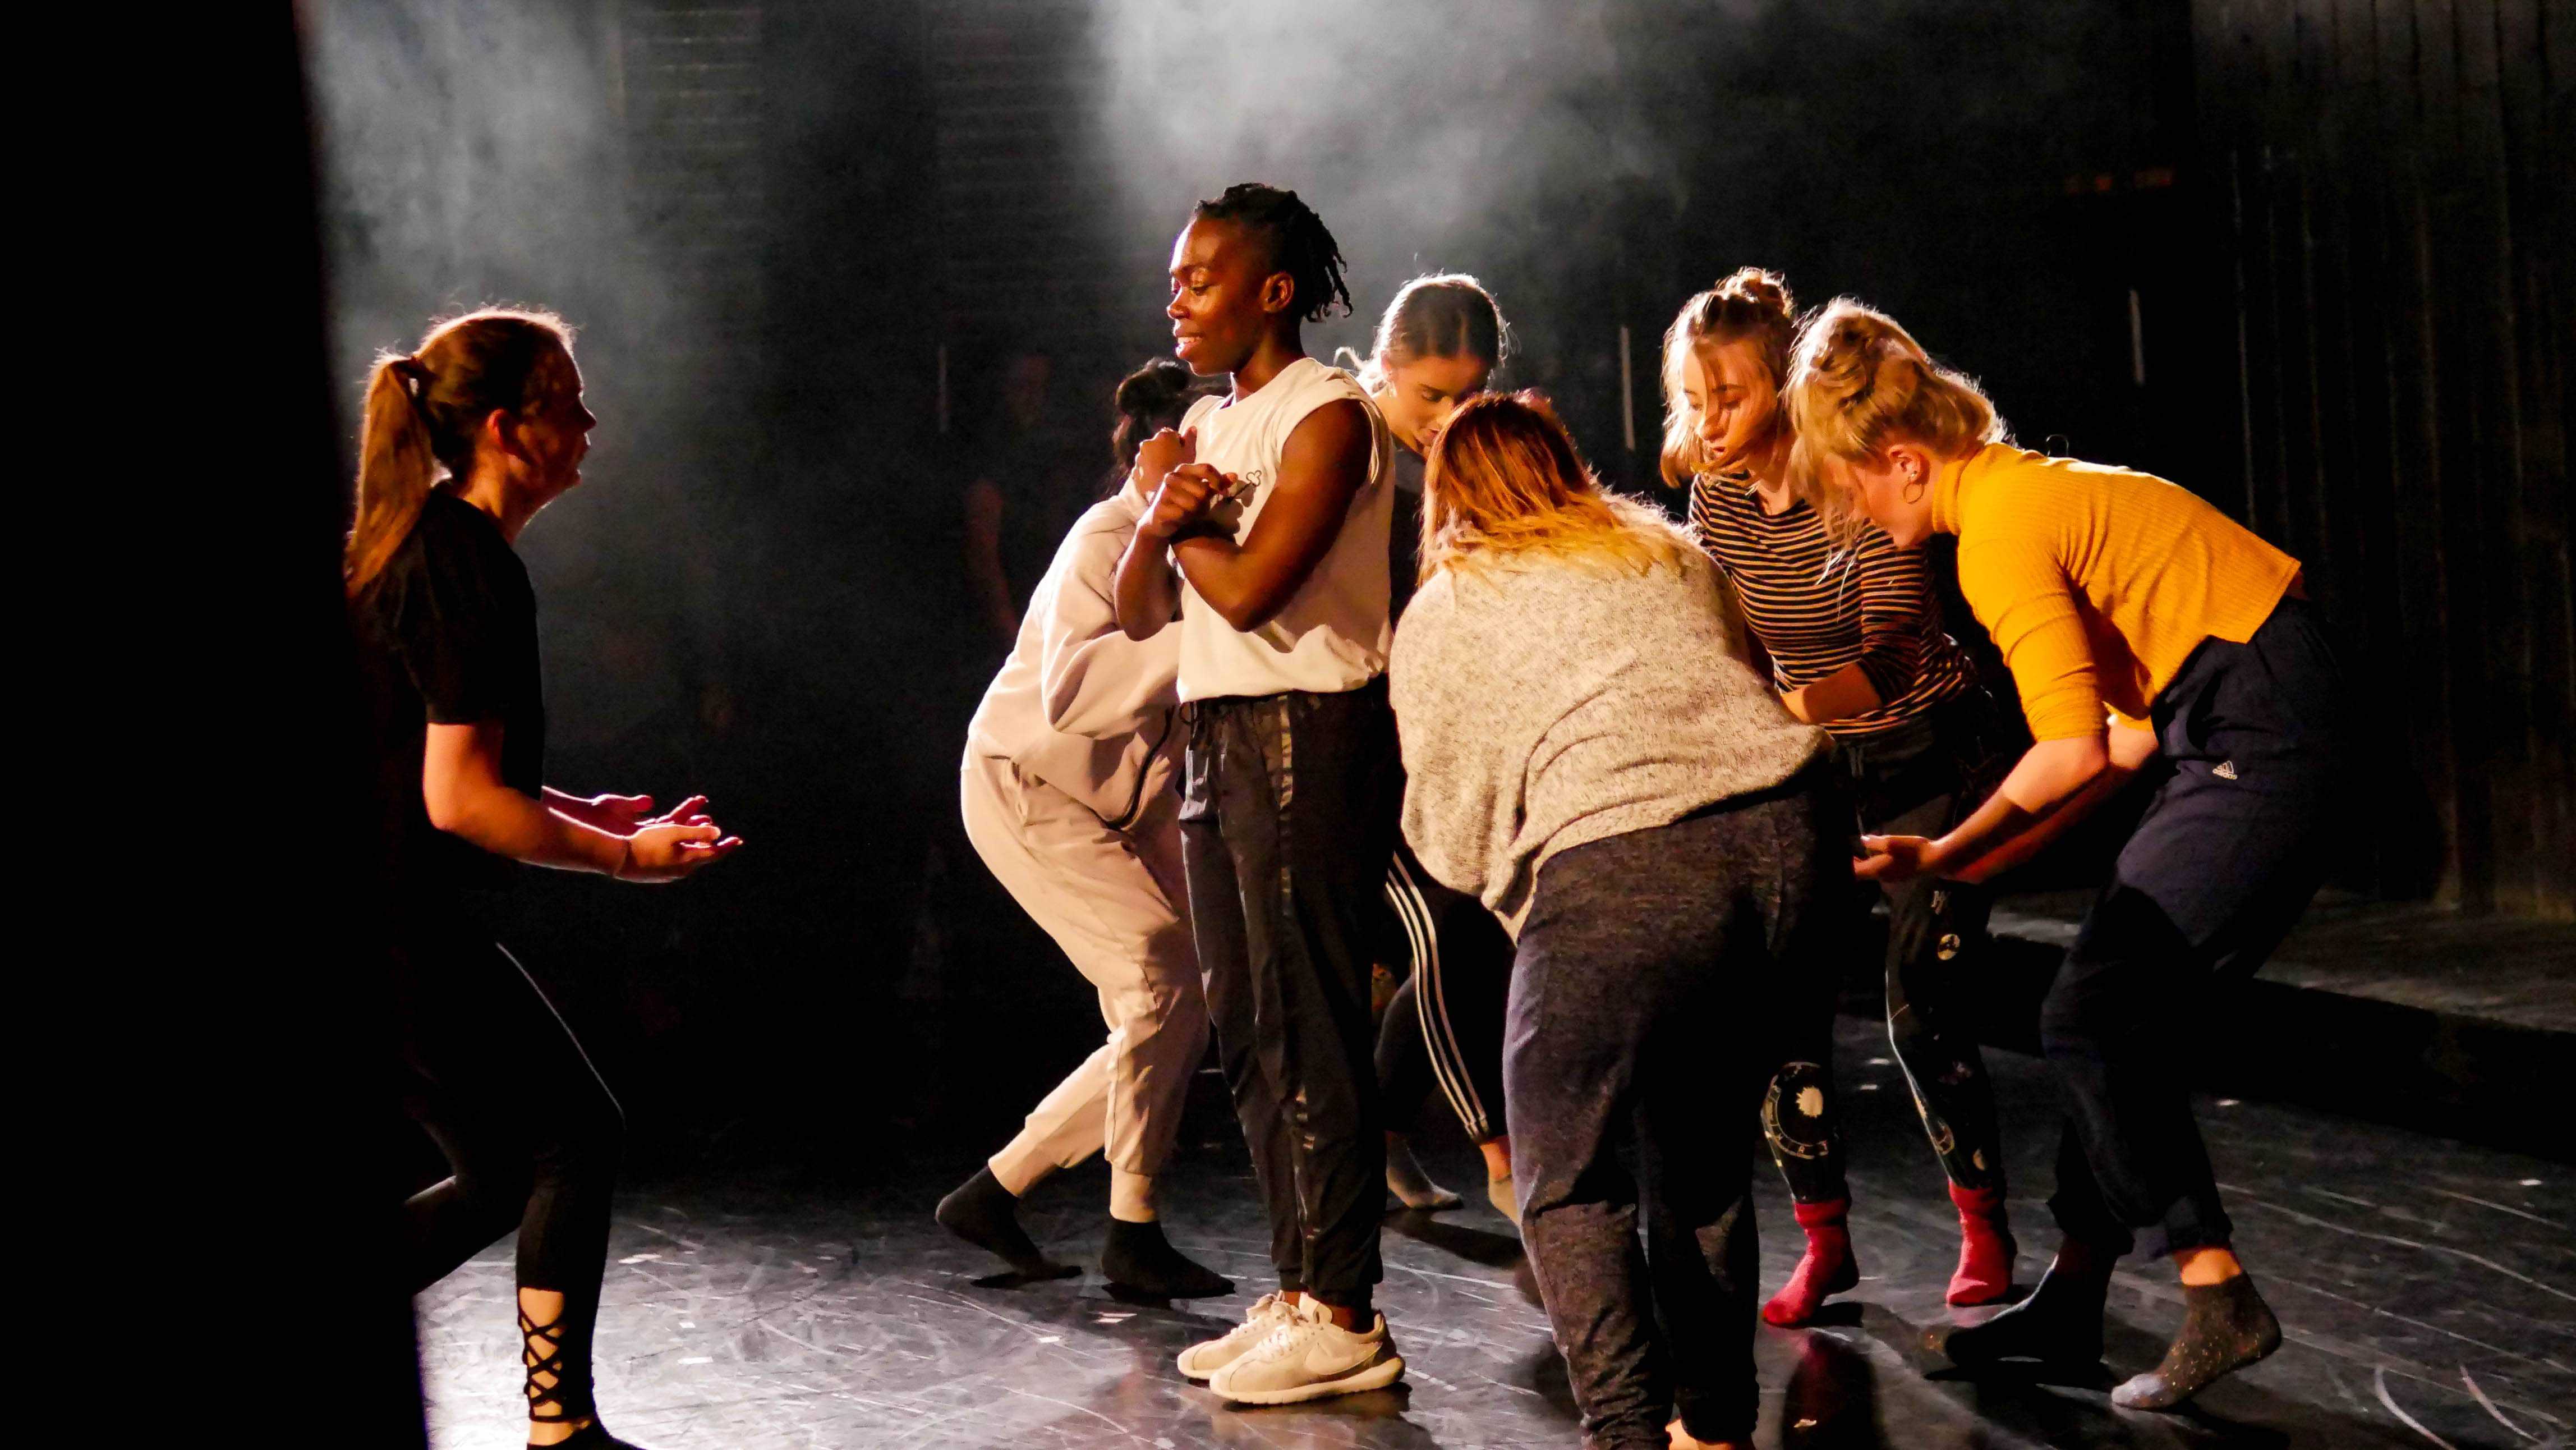 FUSE Diverse Dance creative residencey with Avant Garde Dance, working on Fagin's Twist performance at The Plymouth Athenaeum (Oct 2018) - credit Matt Fowler